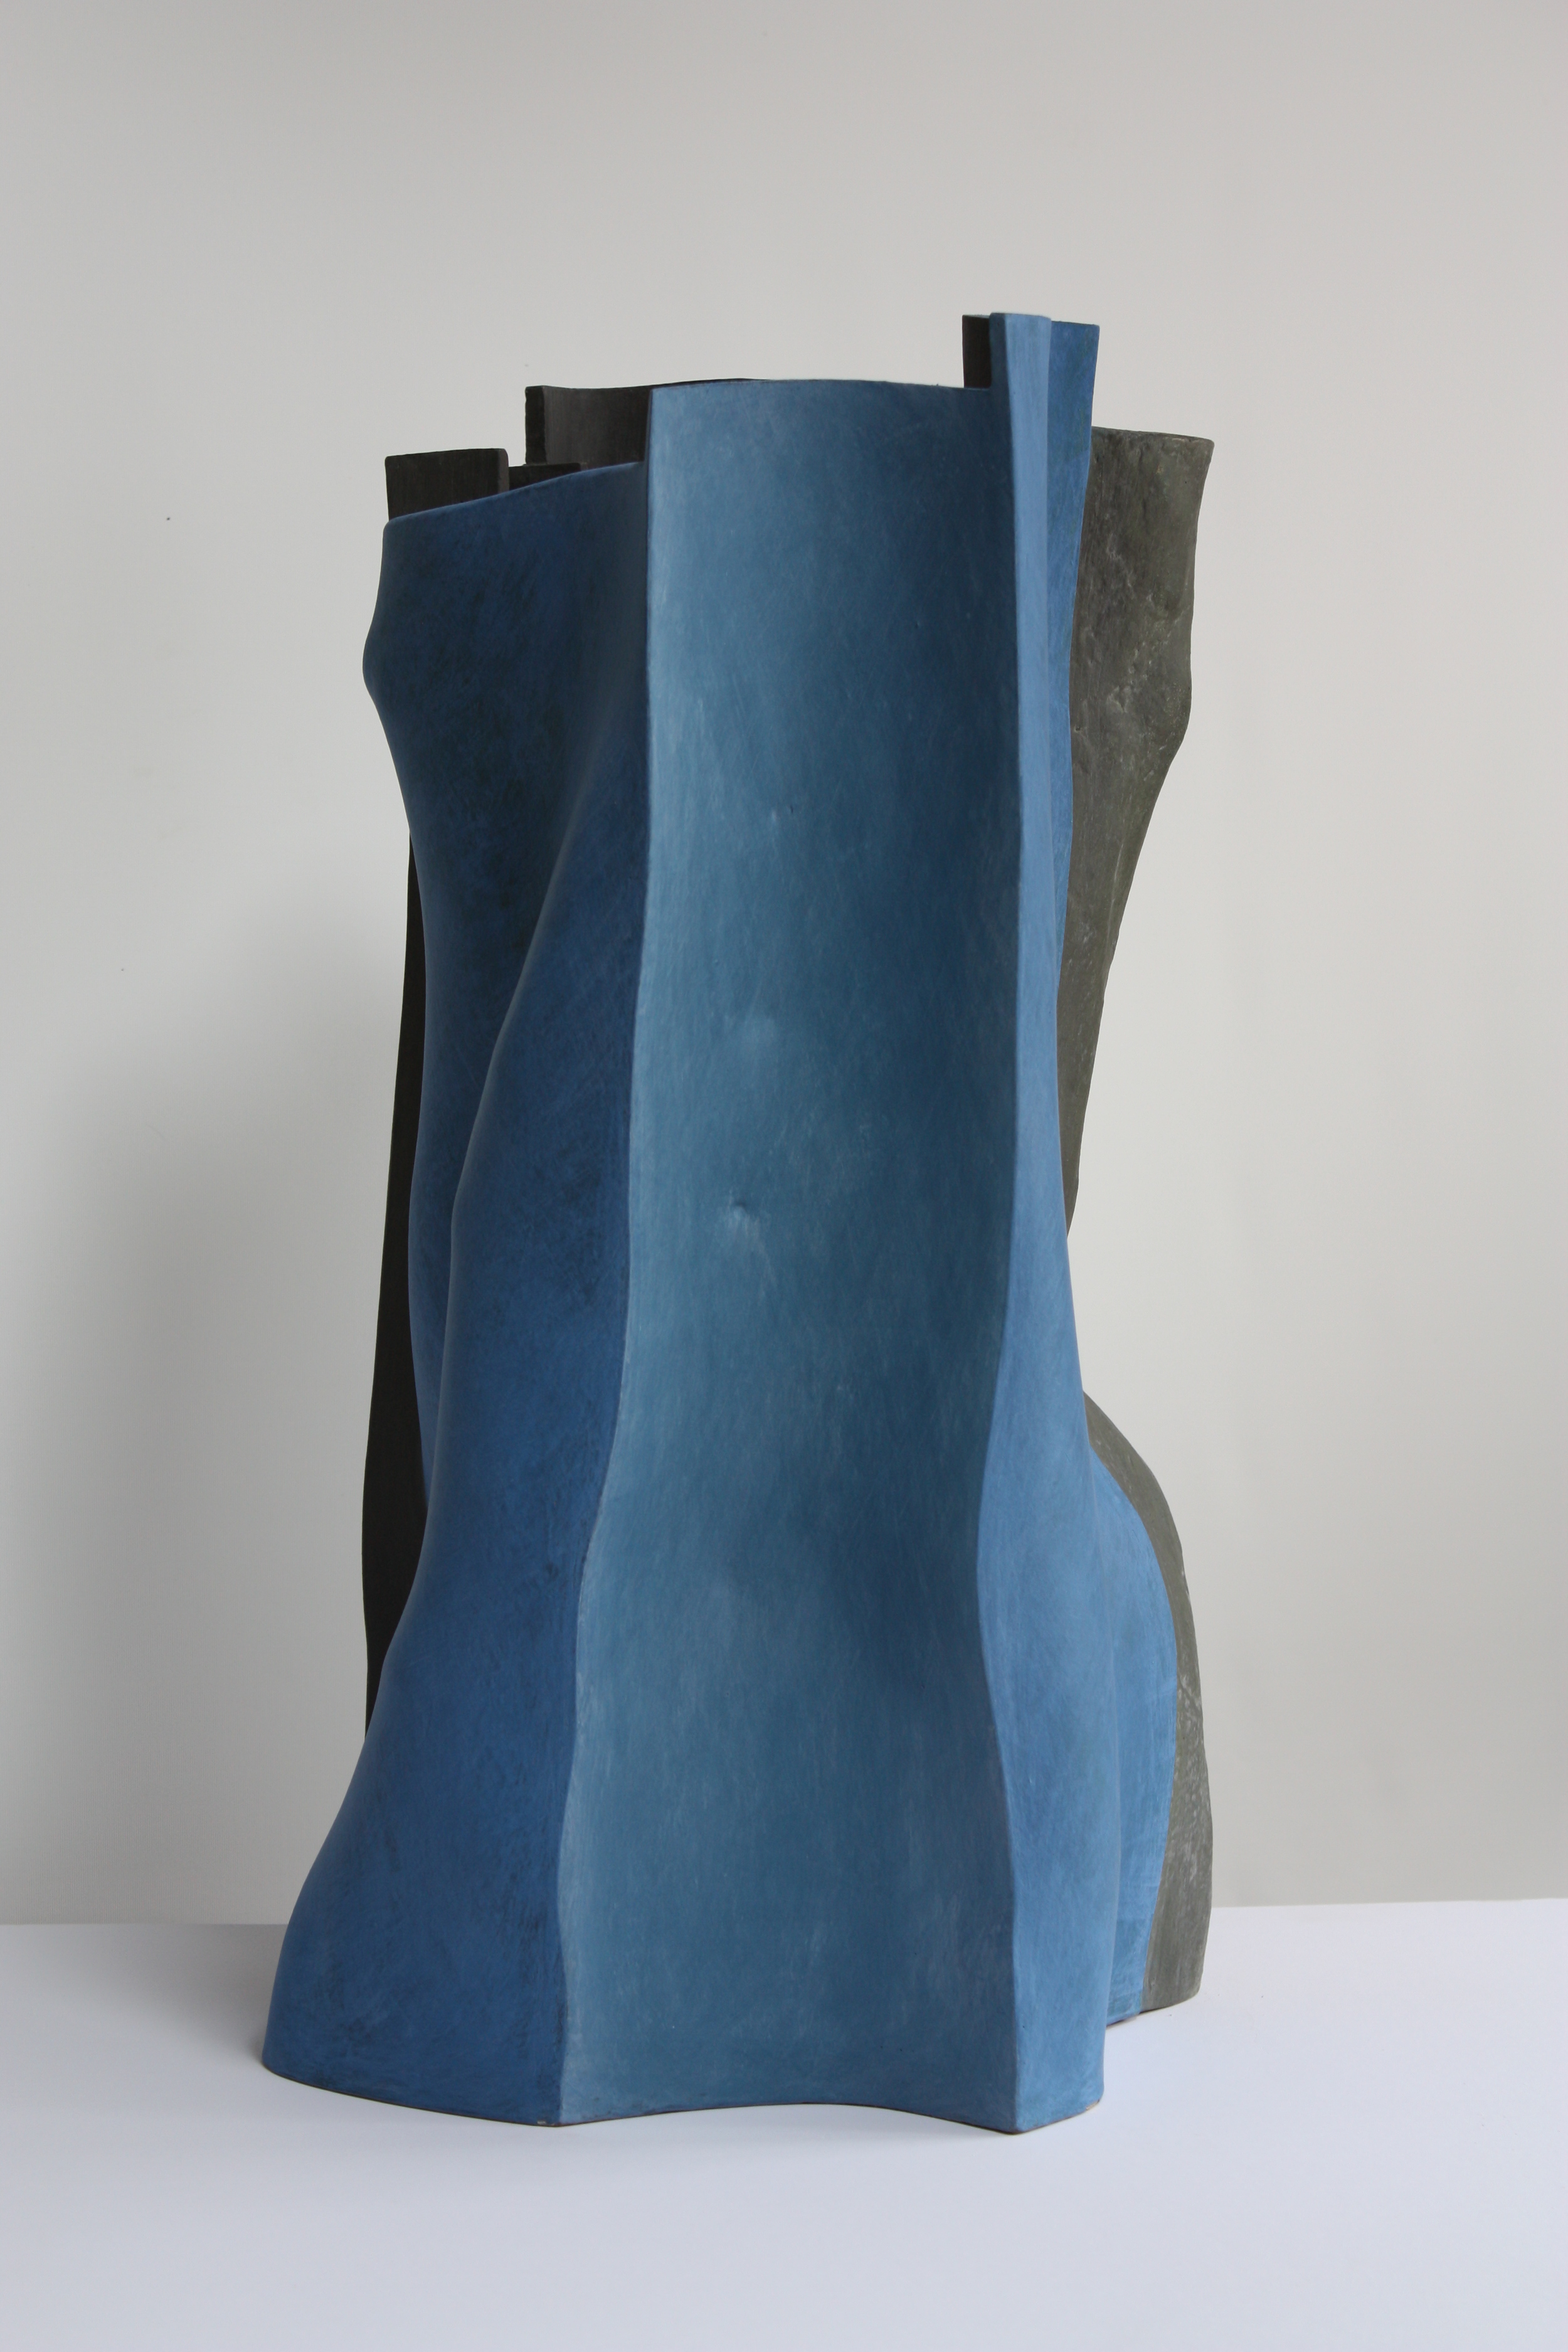 Body and soul, 2012, 60cm high